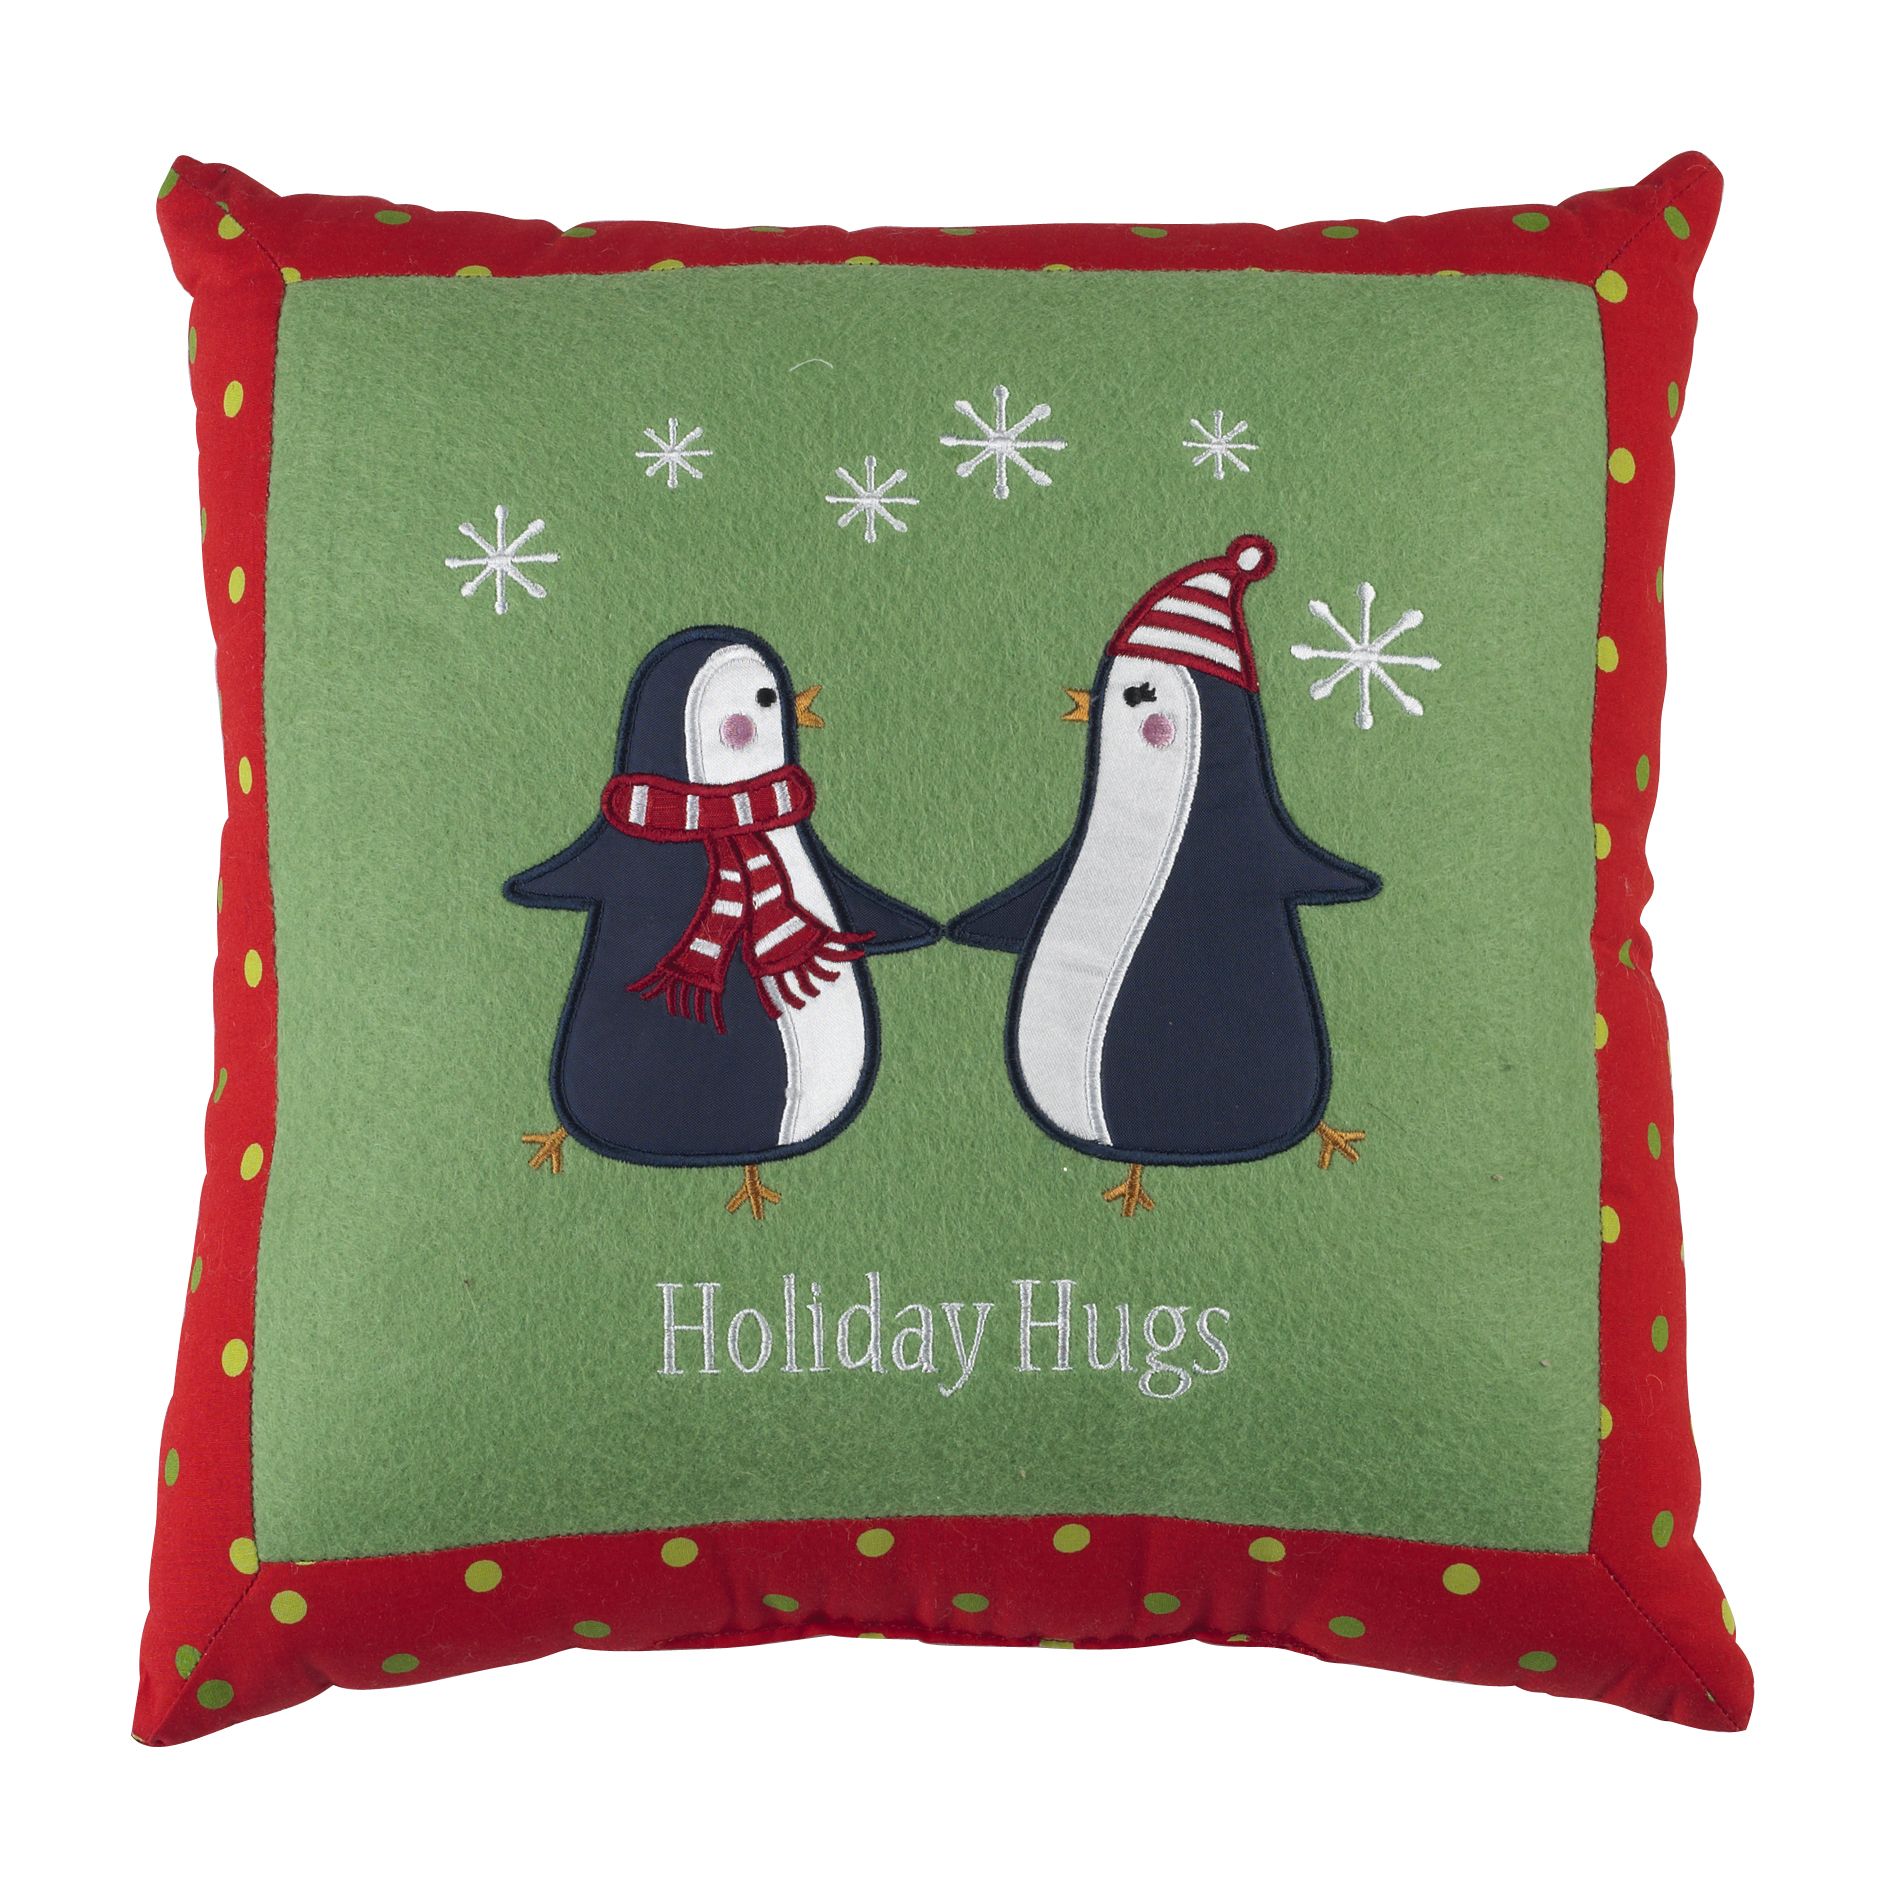 Colormate Holiday Hugs Pillow